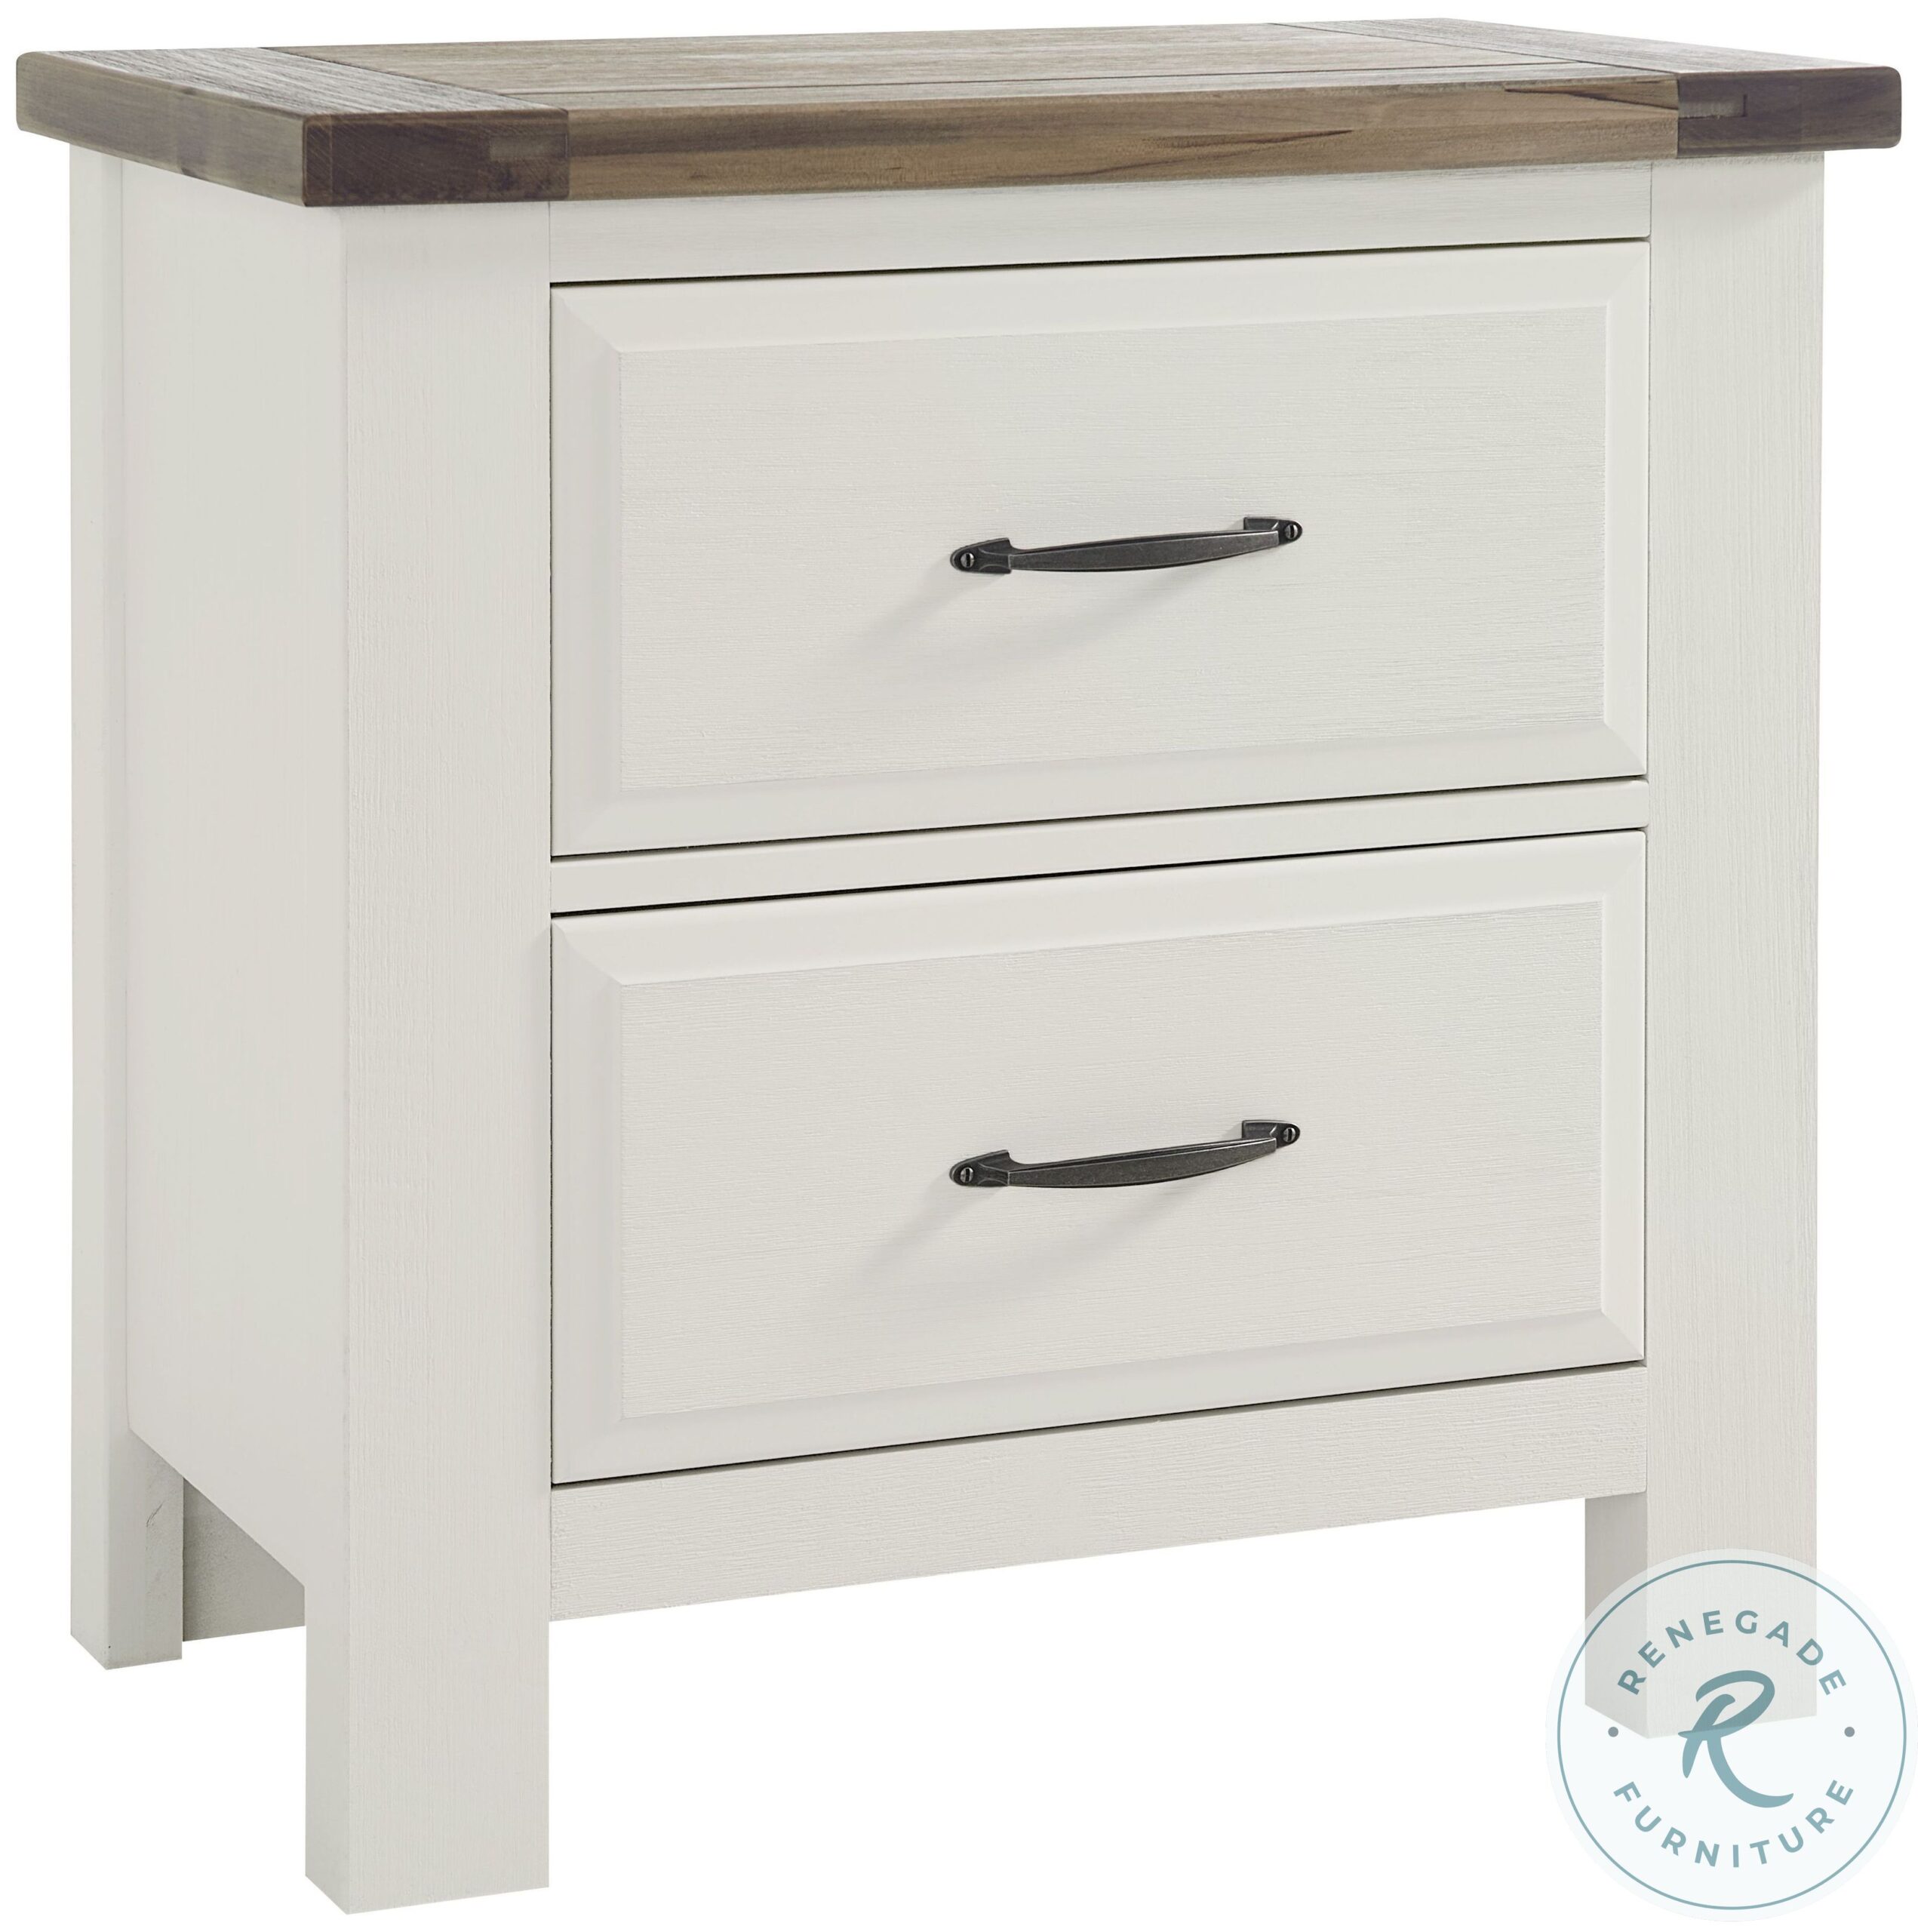 Maple Road Soft White and Natural Top 2 Drawer Nightstand1 scaled